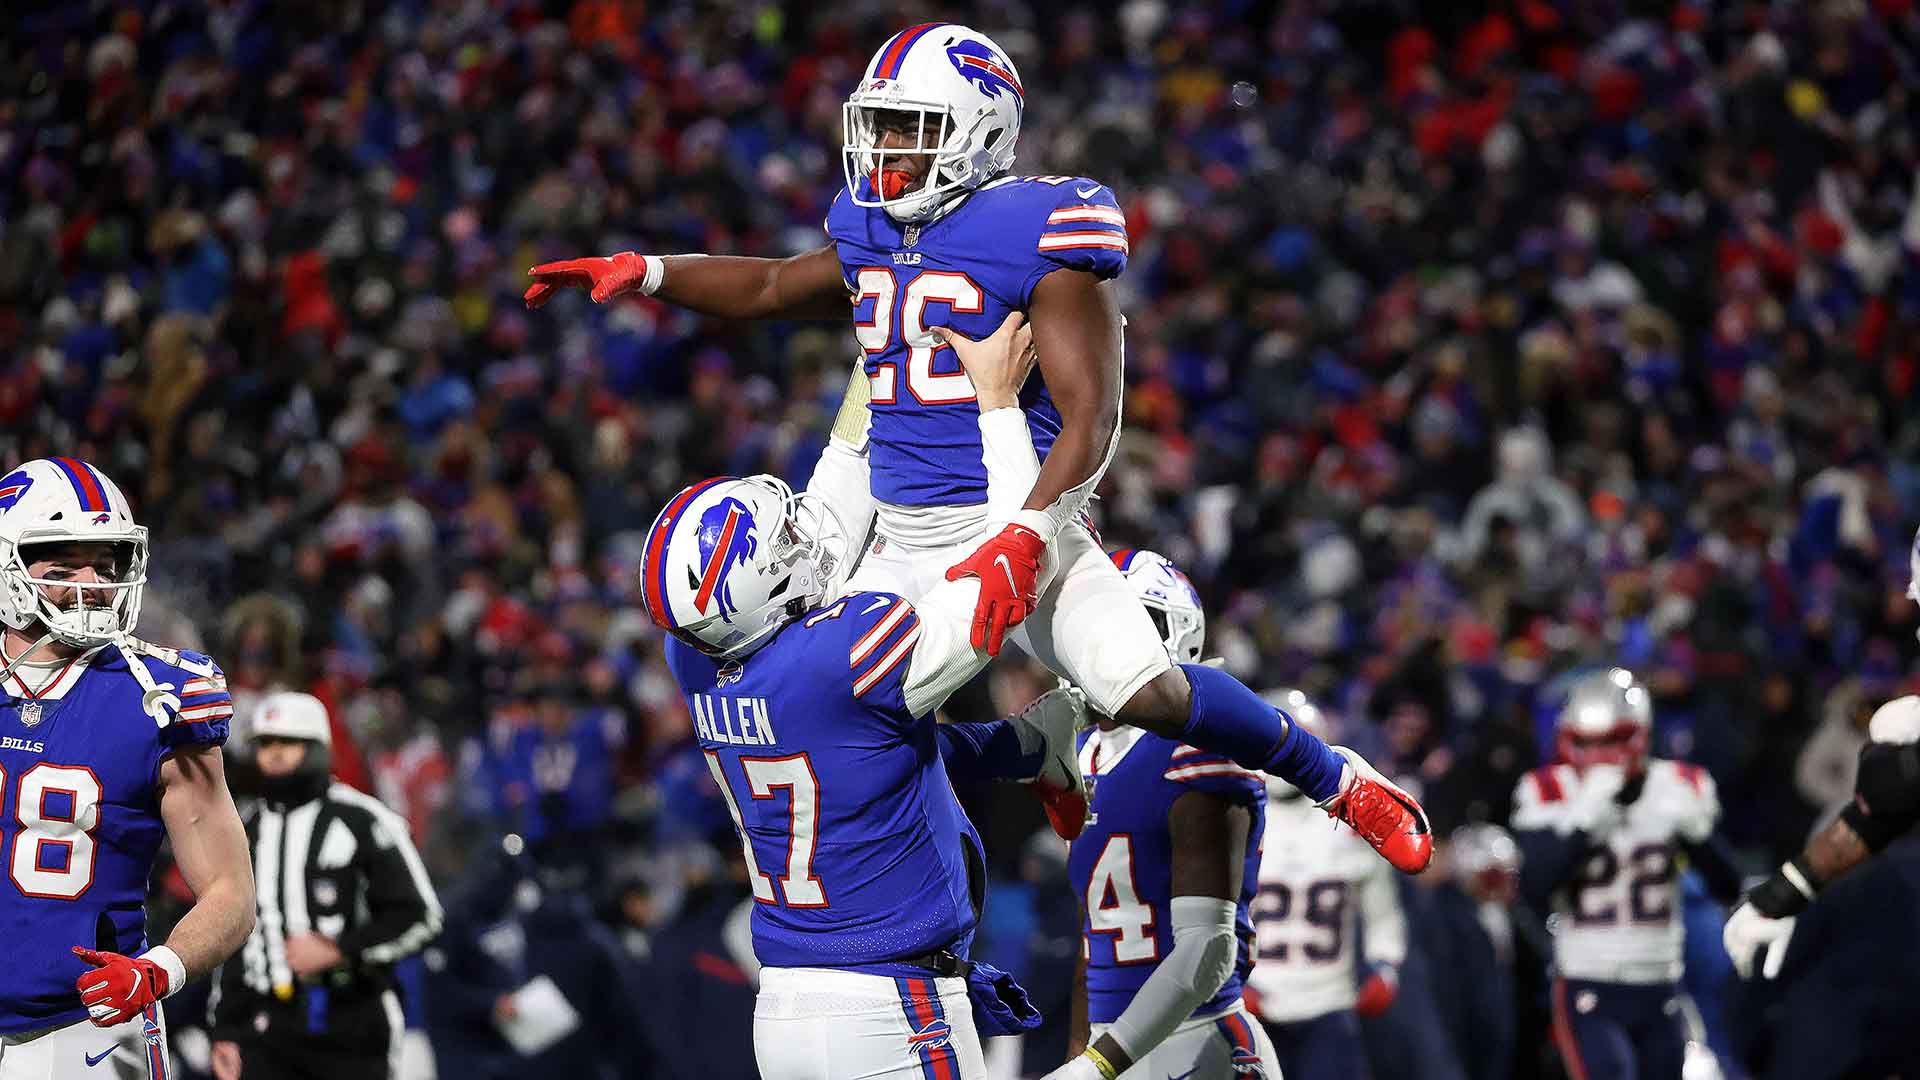 Bills rout Patriots: Key numbers to know from Buffalo's historic win